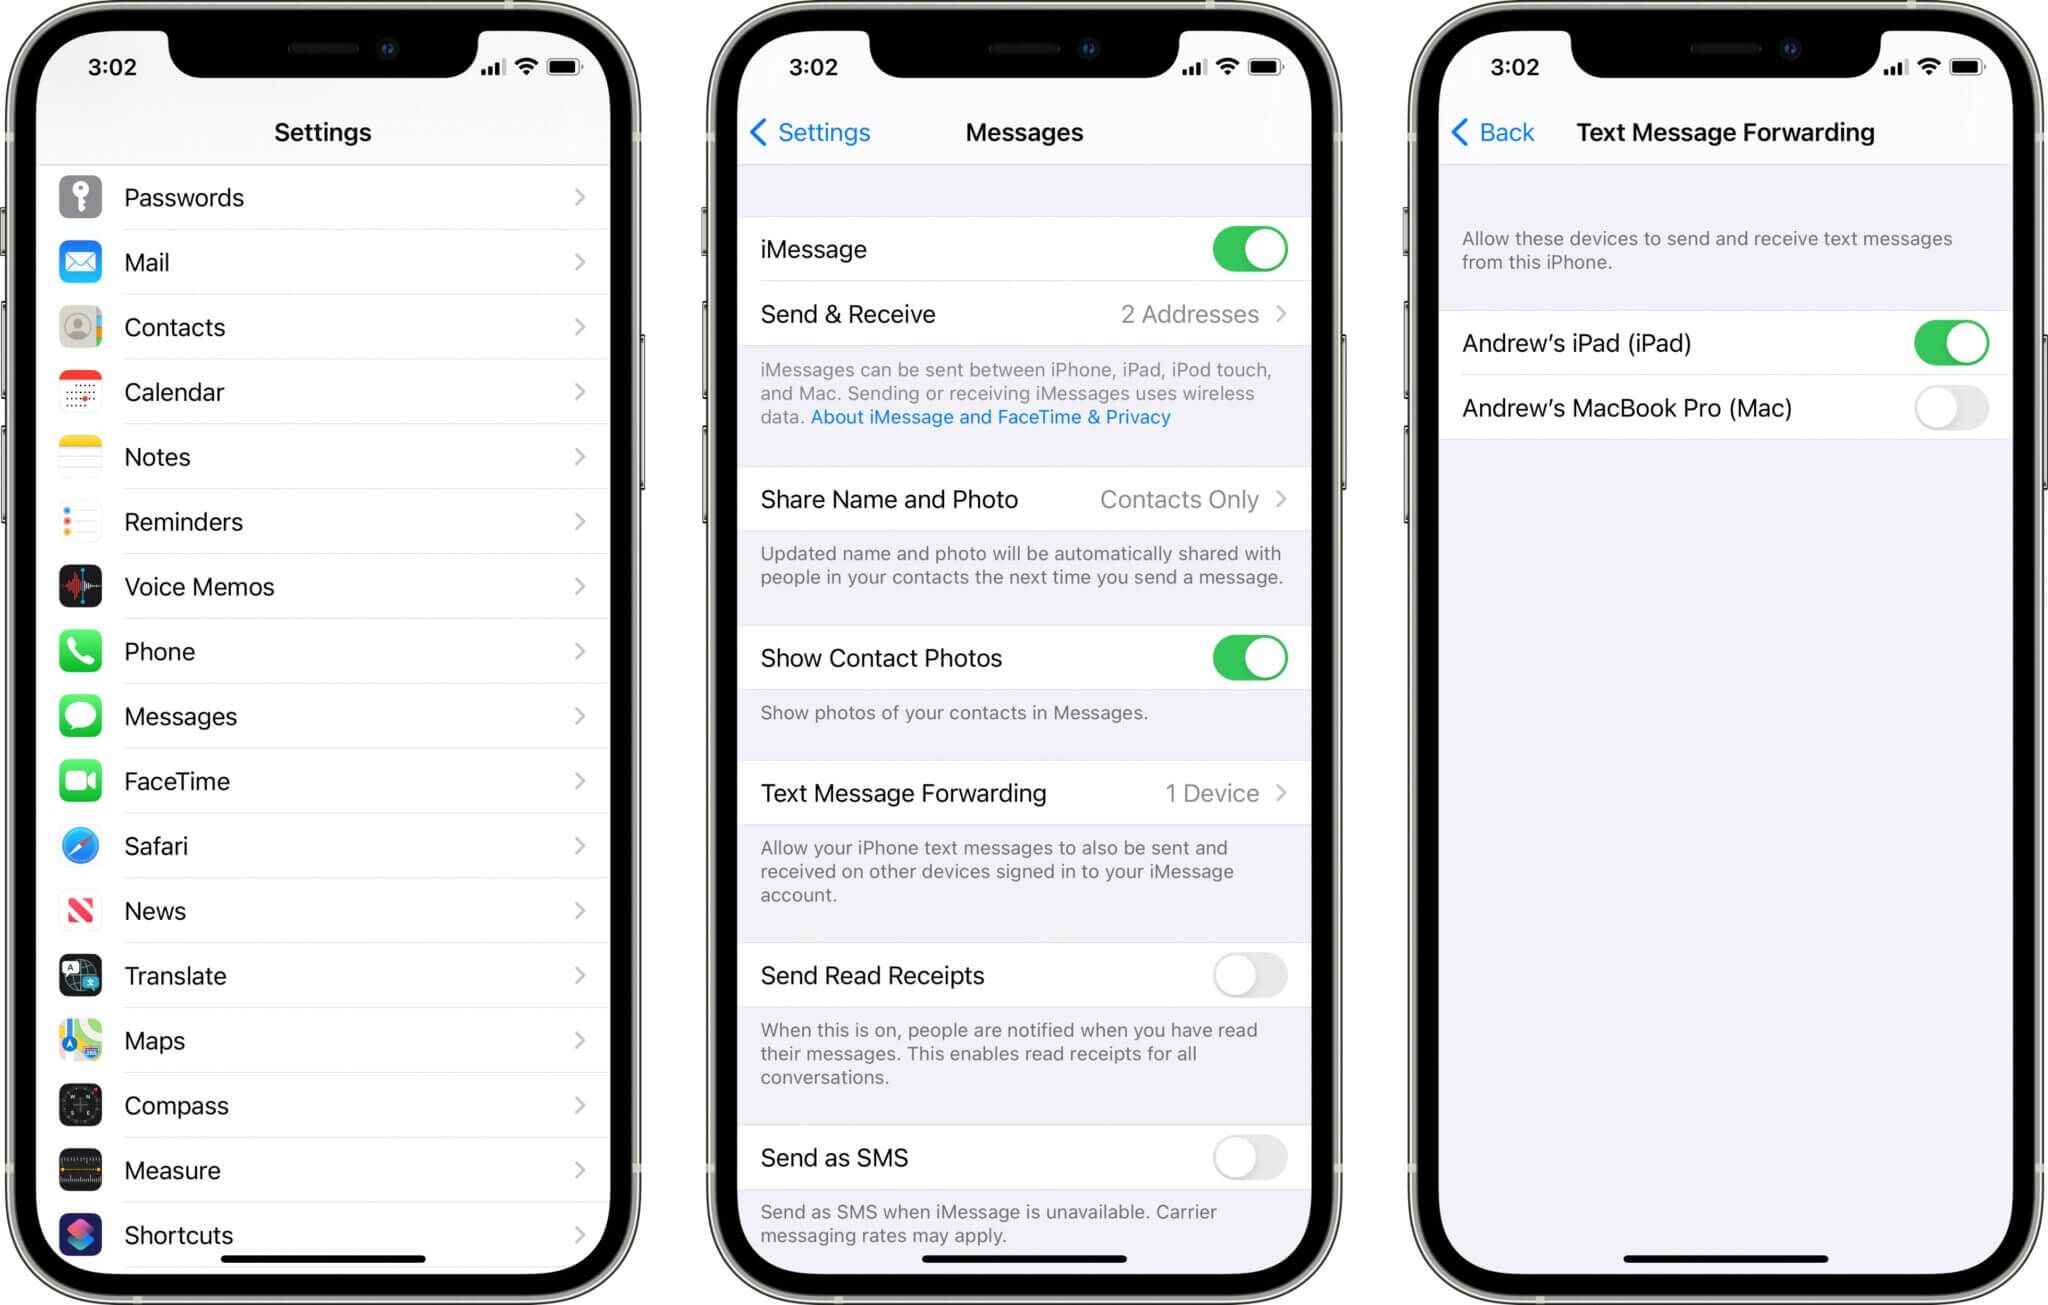 Text Message Forwarding on an iPhone 